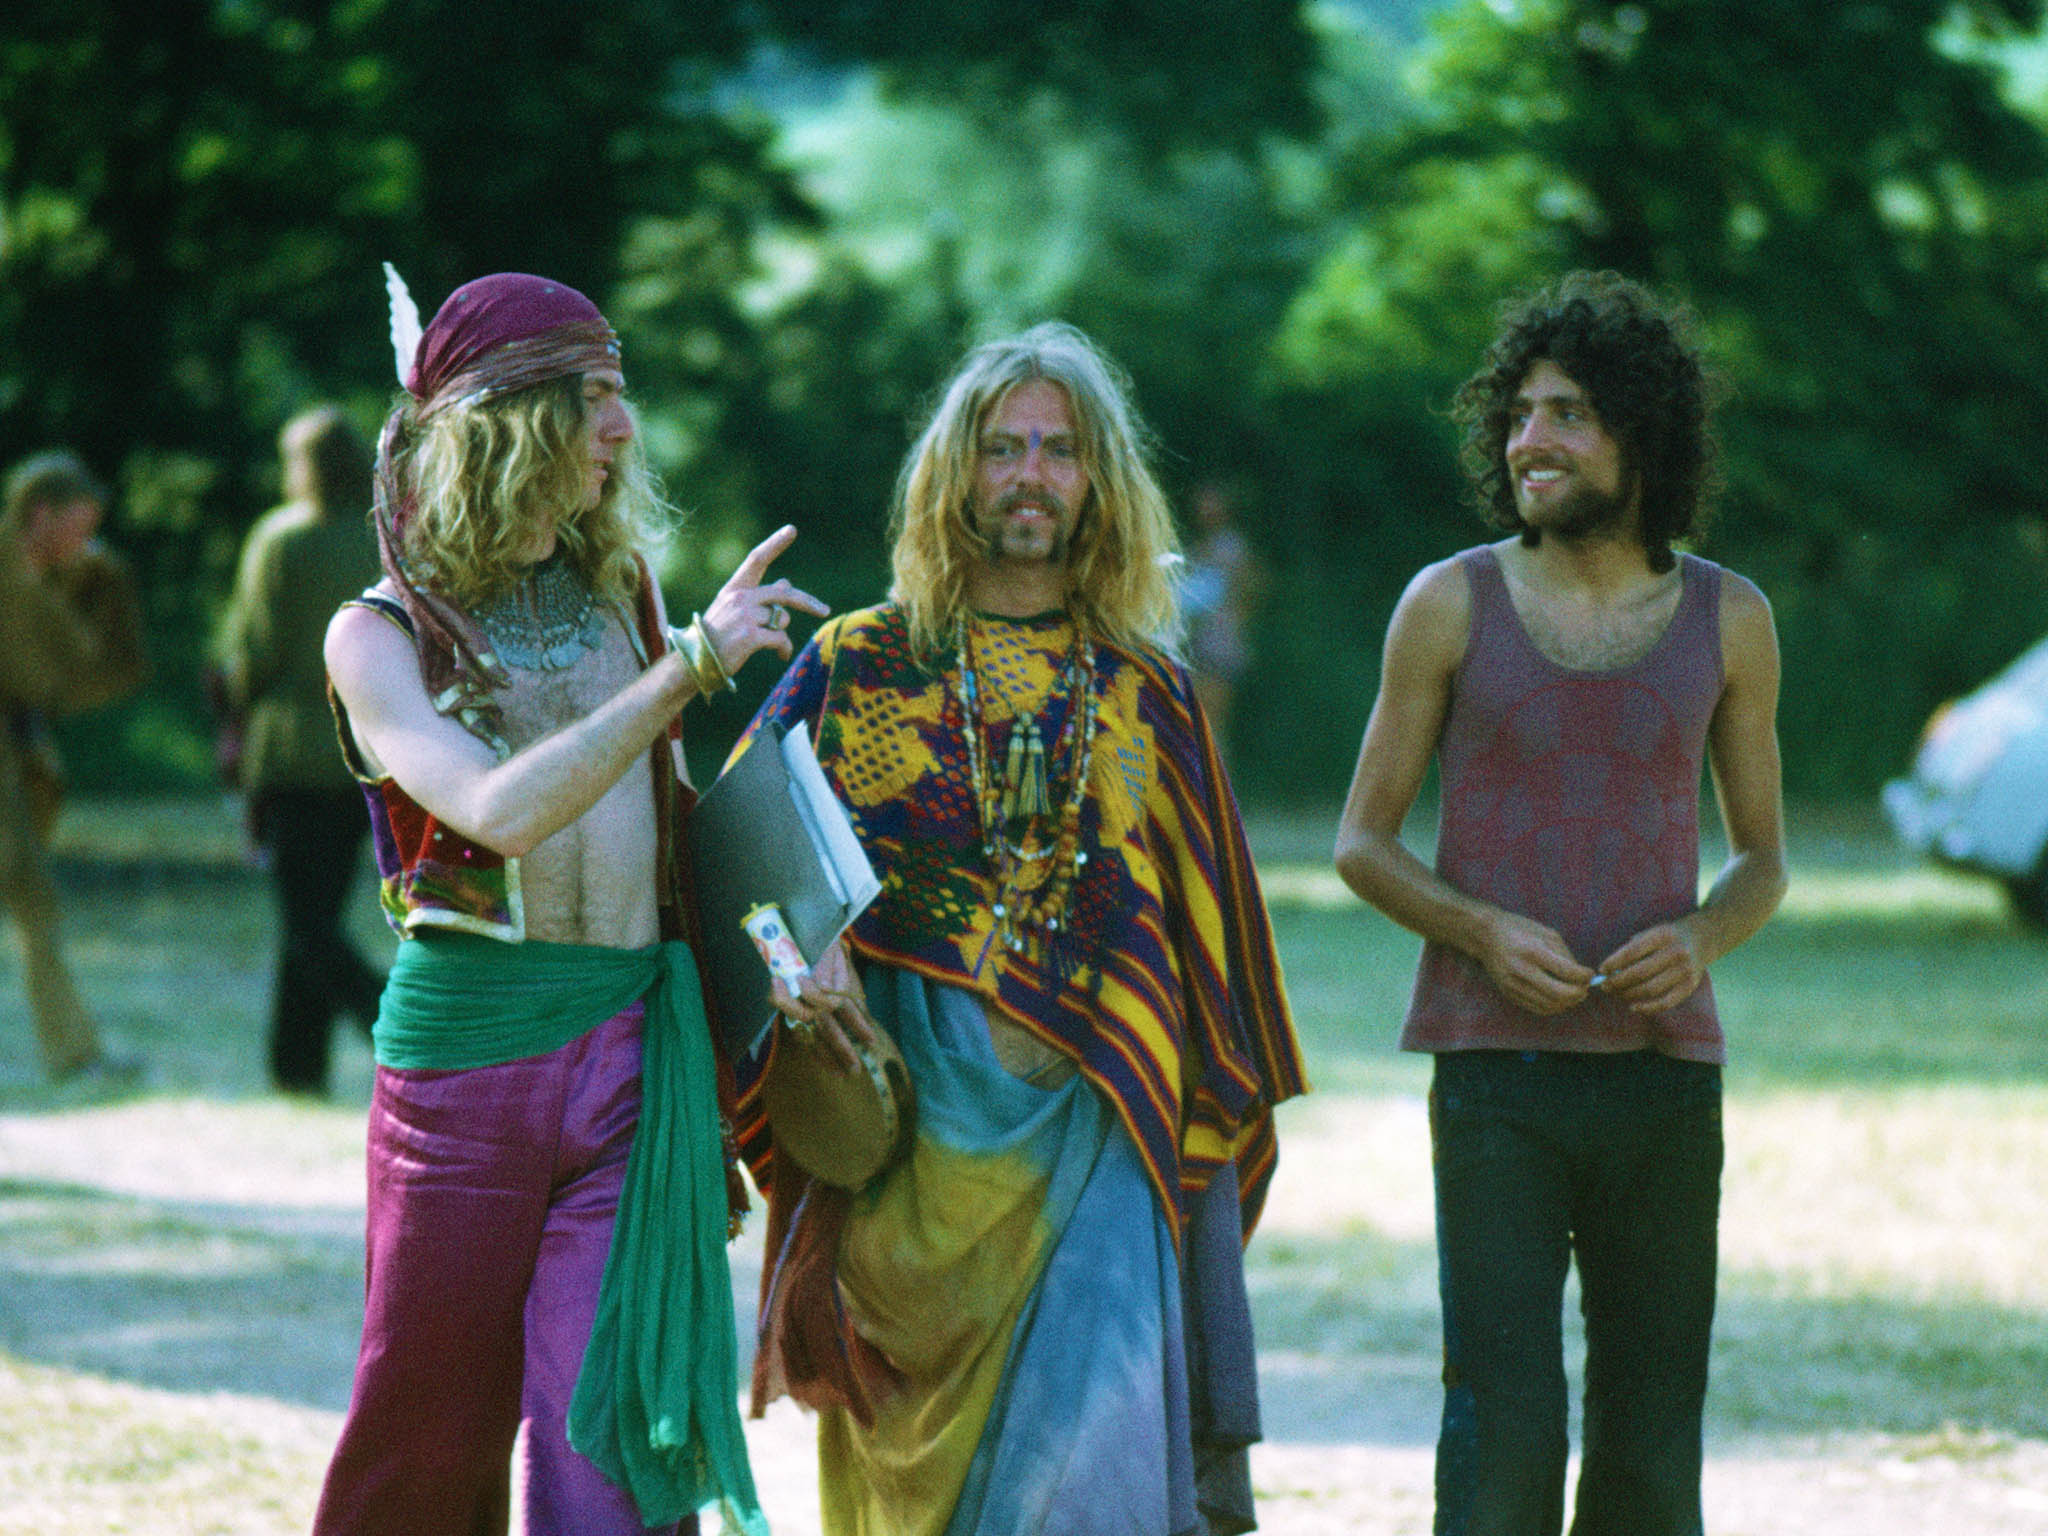 The spiritual core of Glastonbury – as seen in this picture from the 1971 festival – has become truly archaic